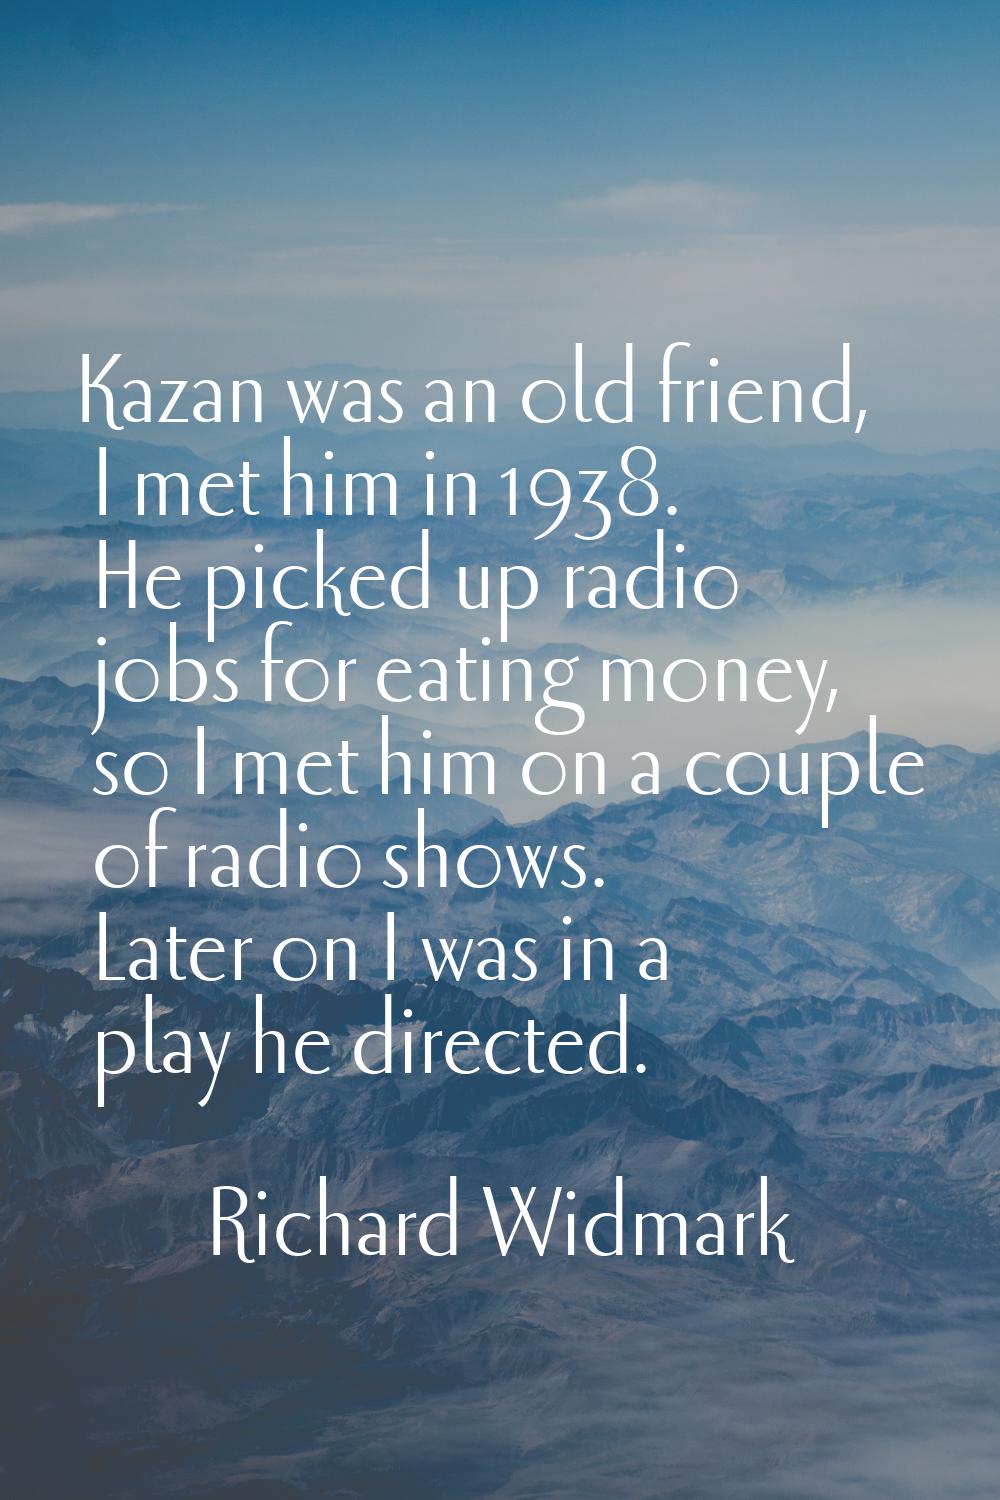 Kazan was an old friend, I met him in 1938. He picked up radio jobs for eating money, so I met him 